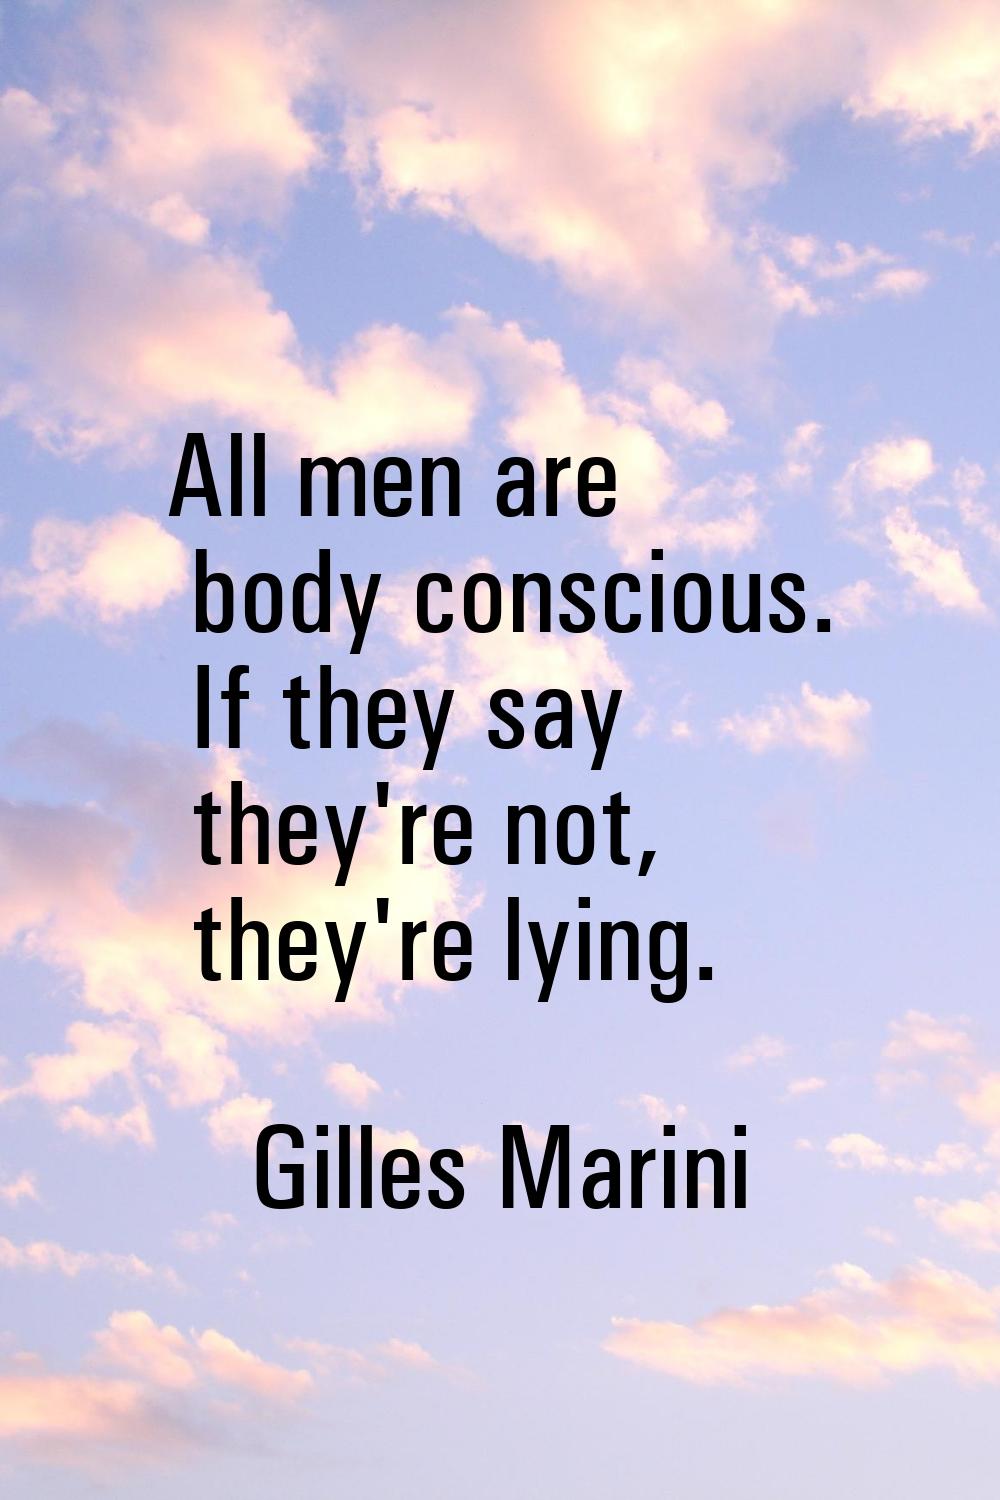 All men are body conscious. If they say they're not, they're lying.